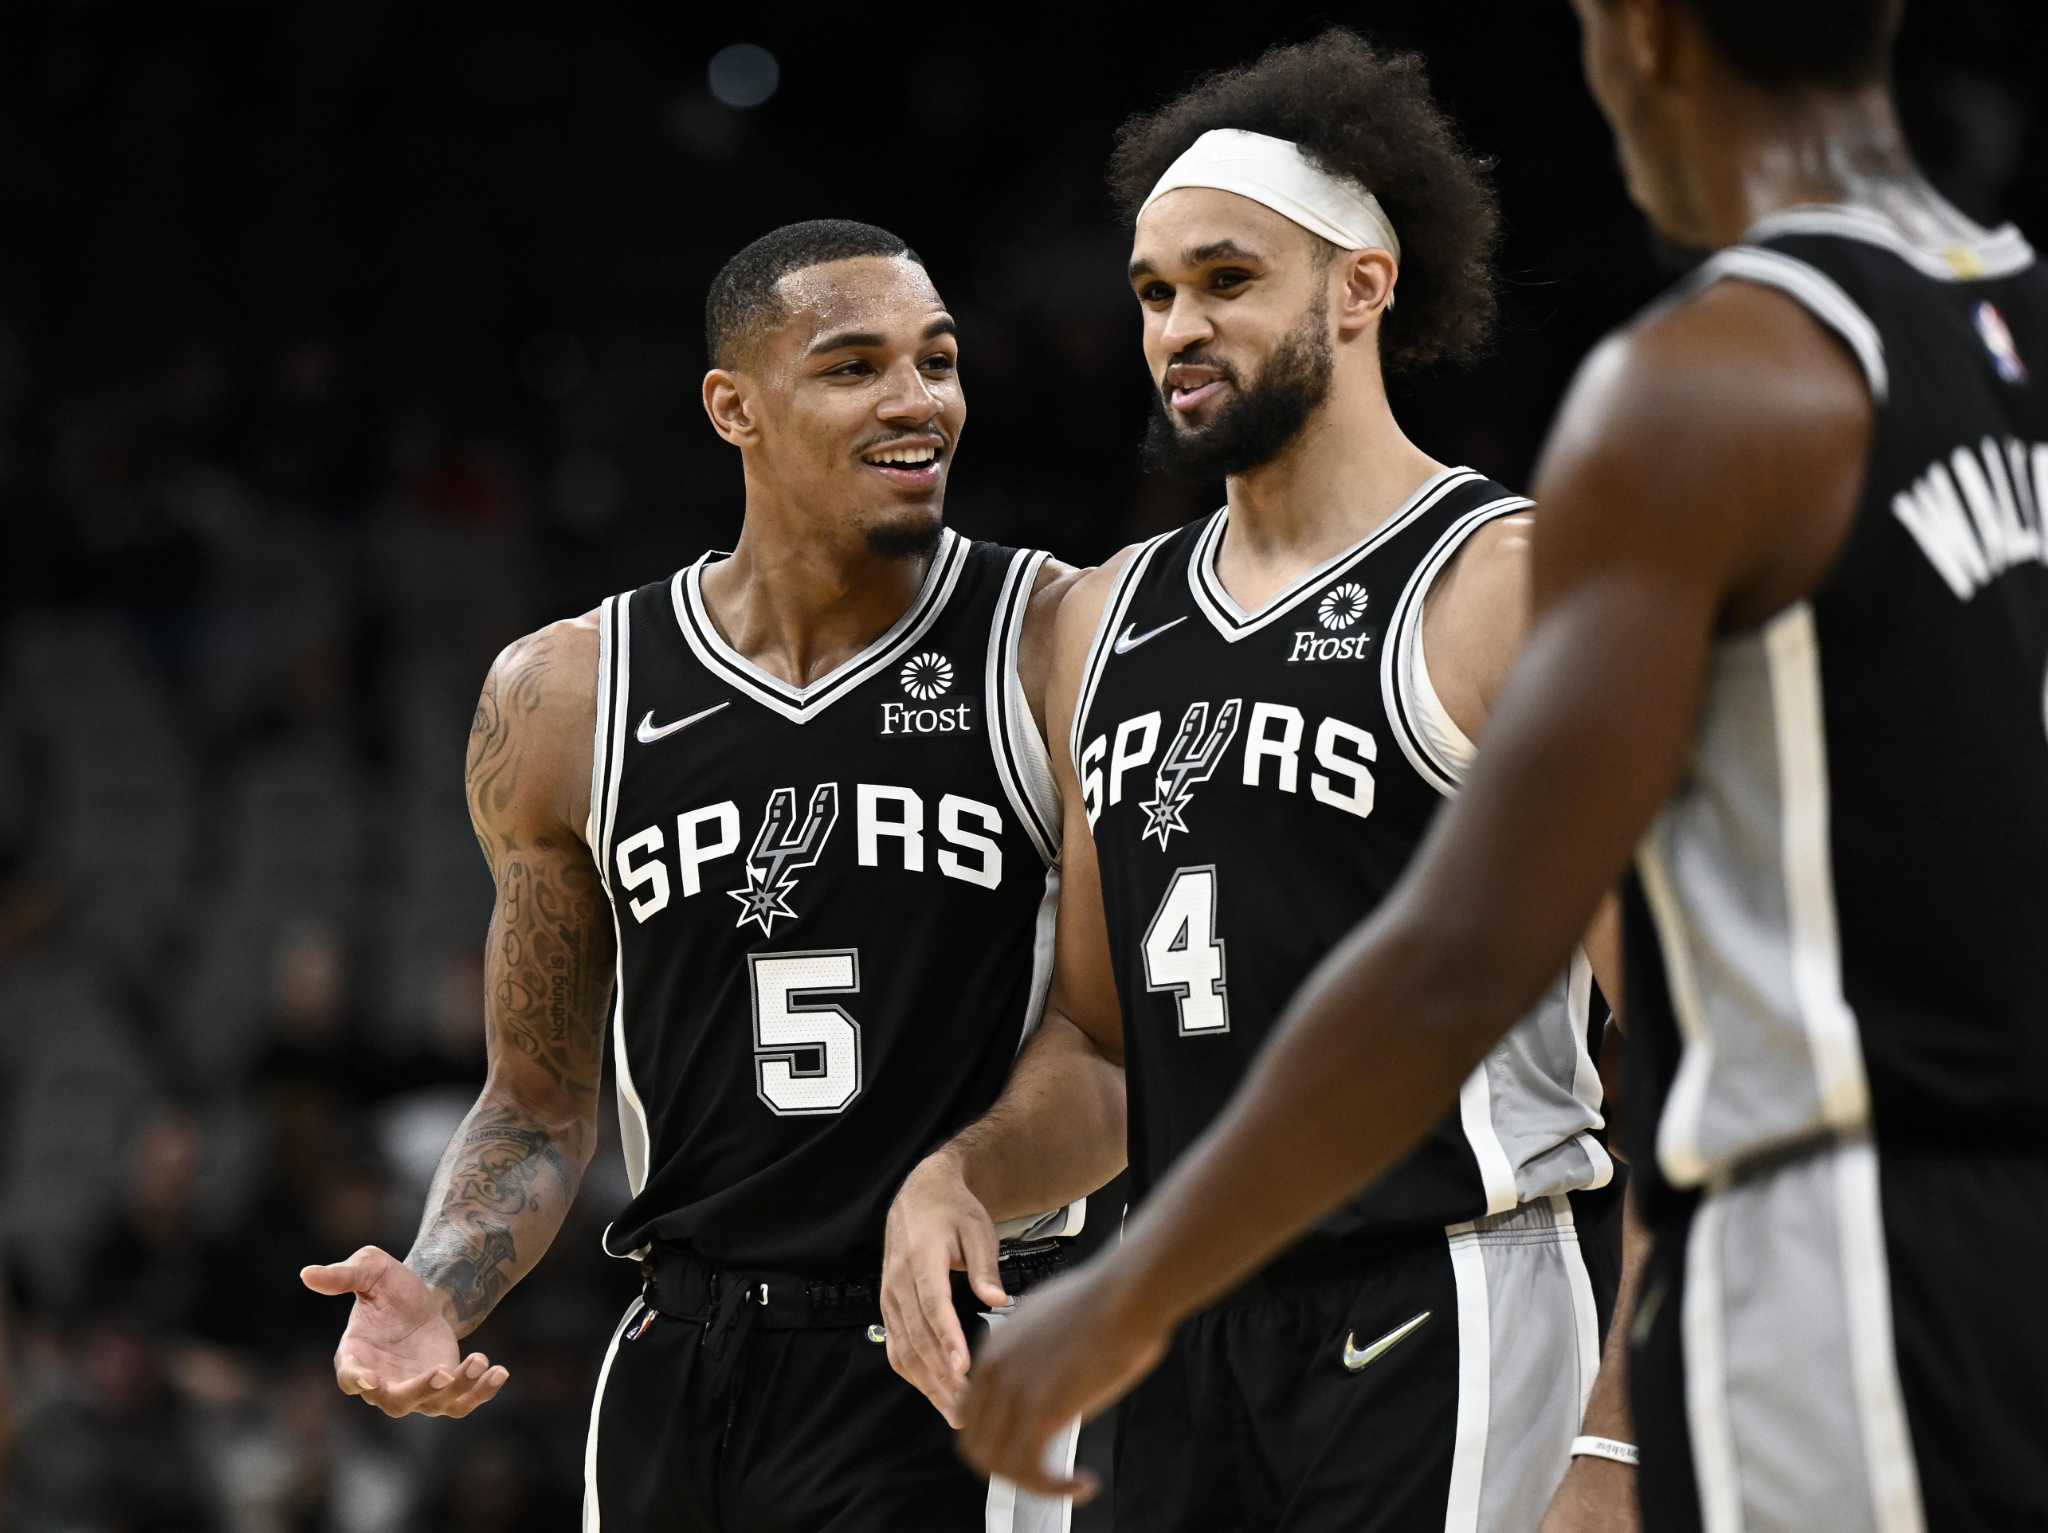 San Antonio Spurs: Could The Spurs Challenge The Warriors Out West?